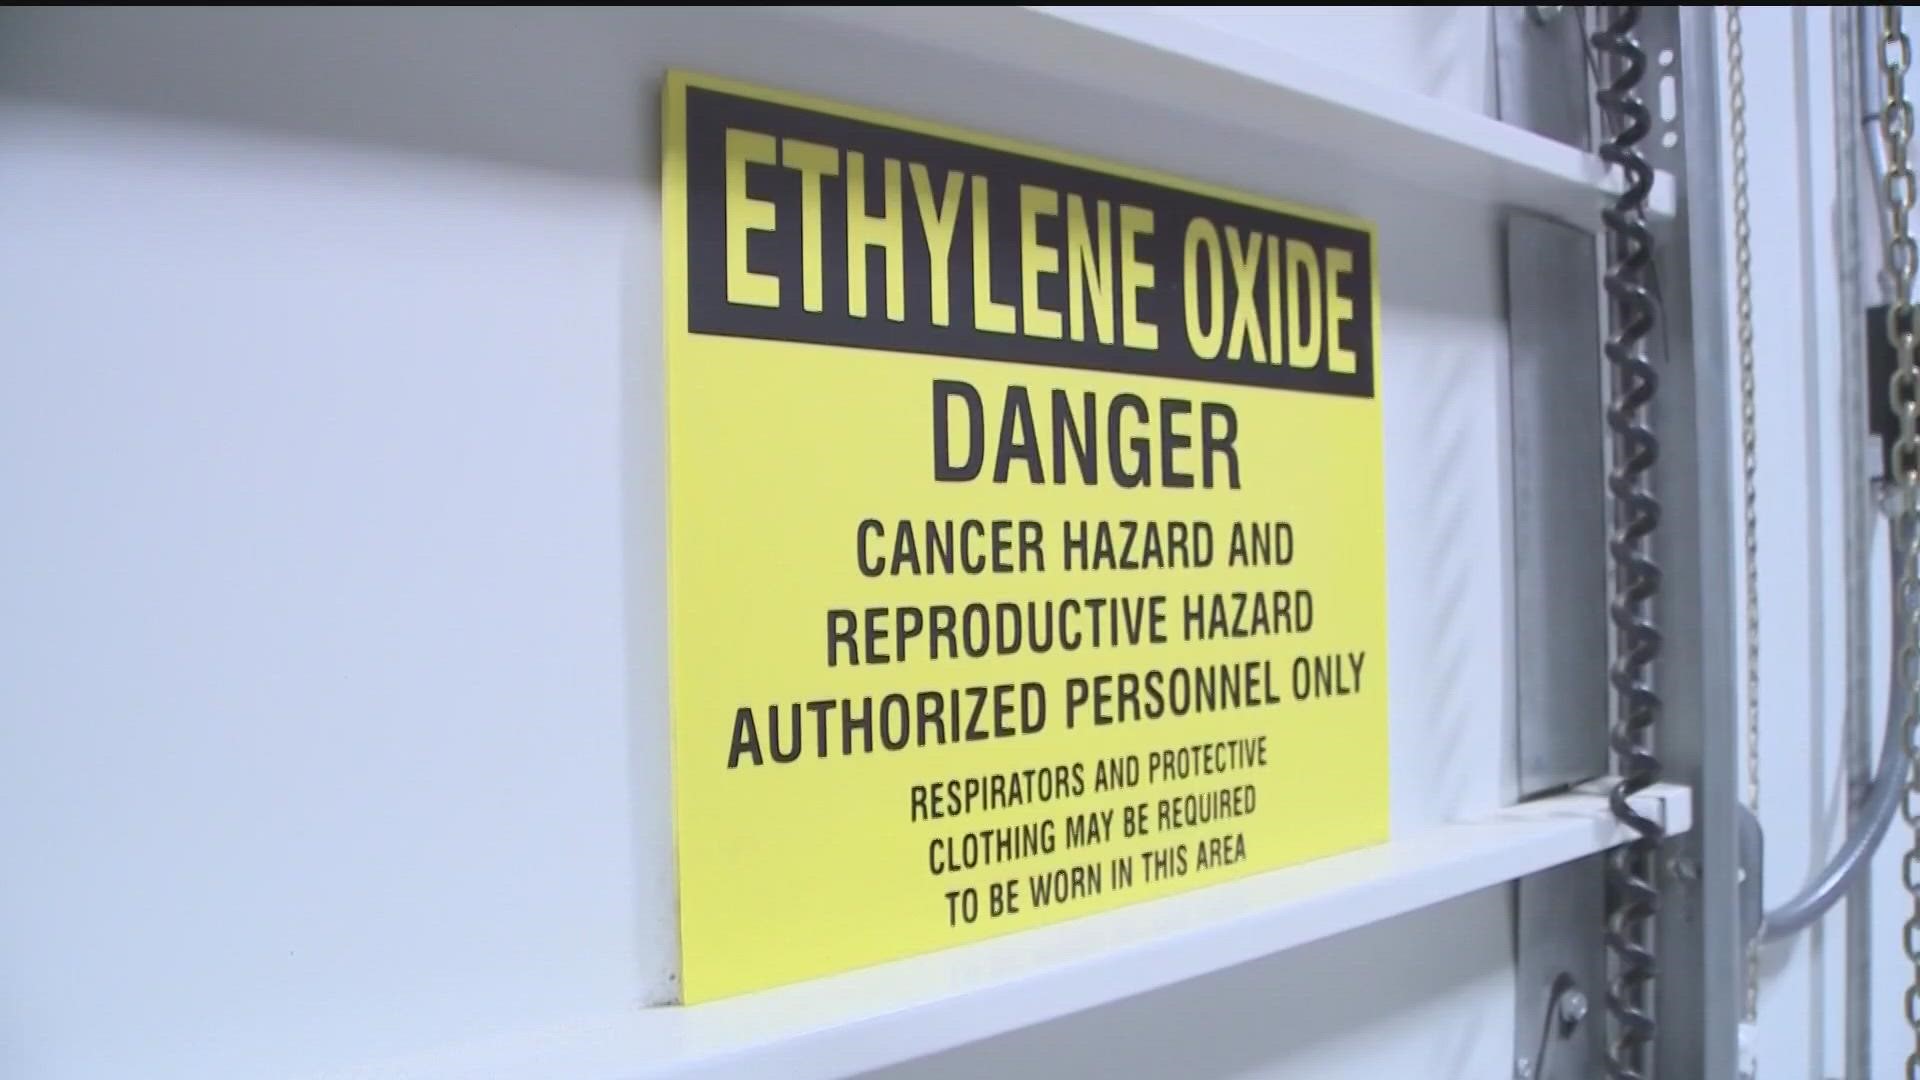 Four Cobb County homeowners have filed lawsuits against Sterigenics, claiming the cancer-causing chemical Ethylene Oxide is impacting their home values.